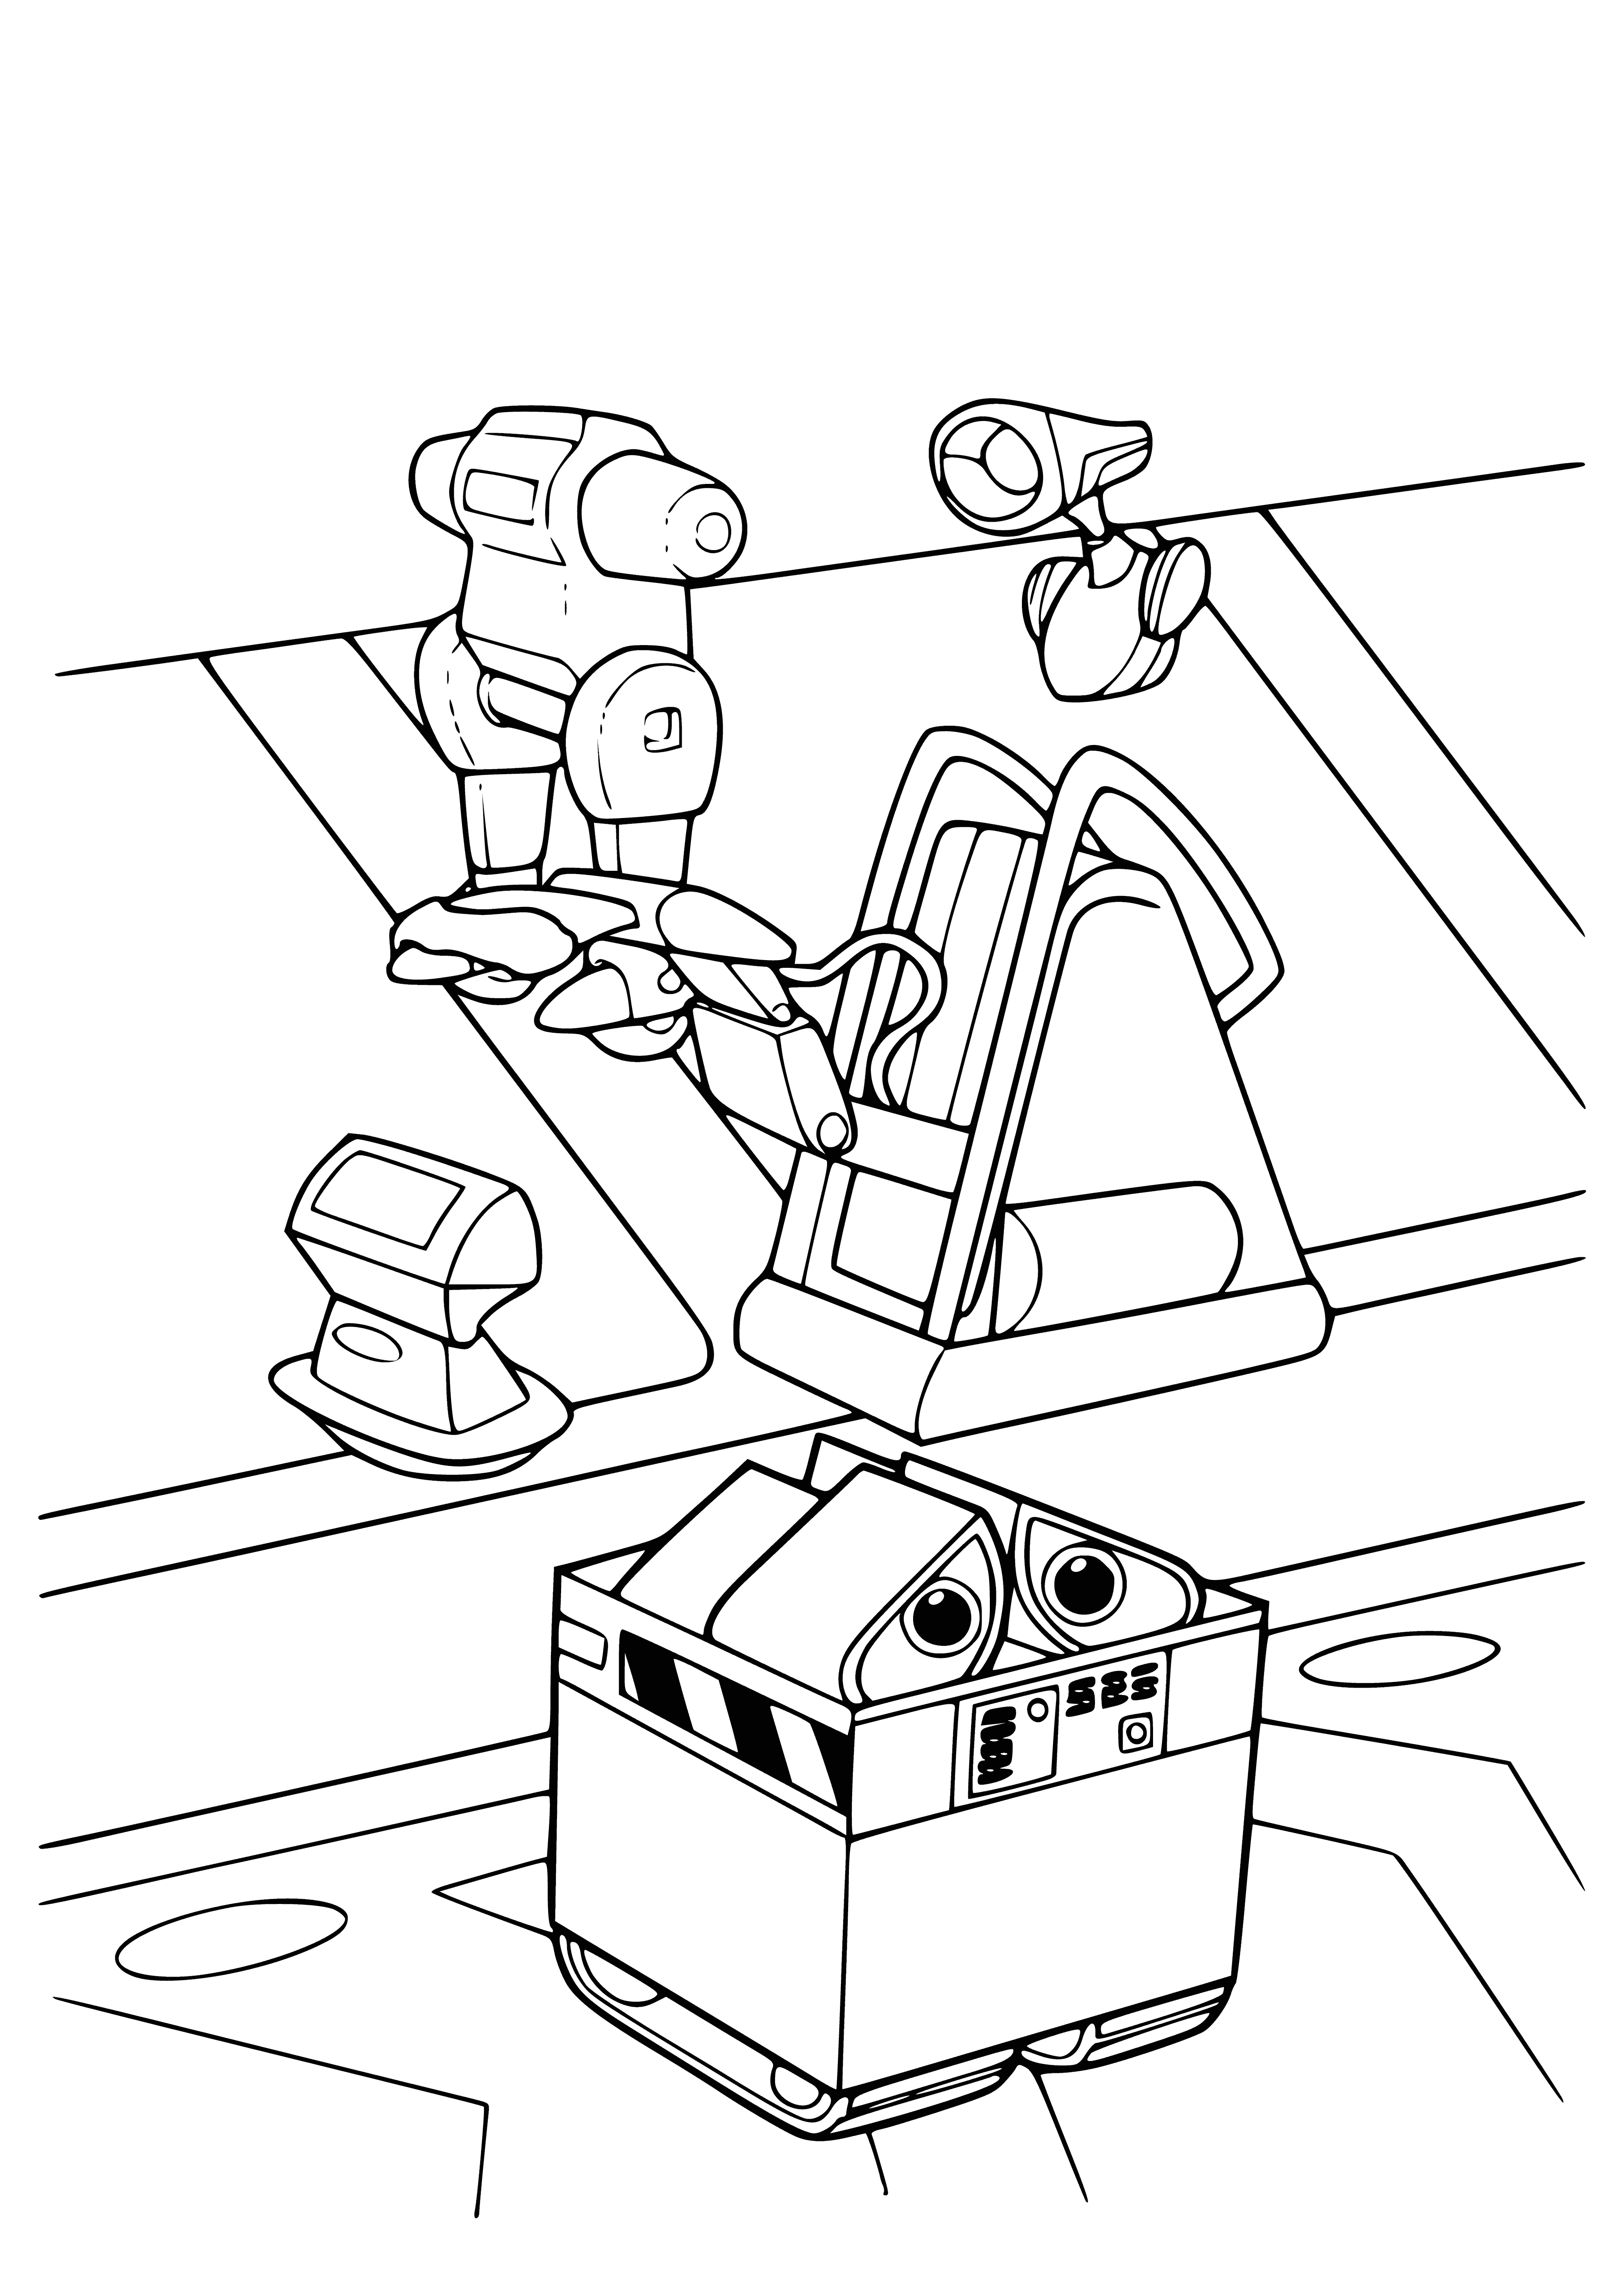 Robots coloring page